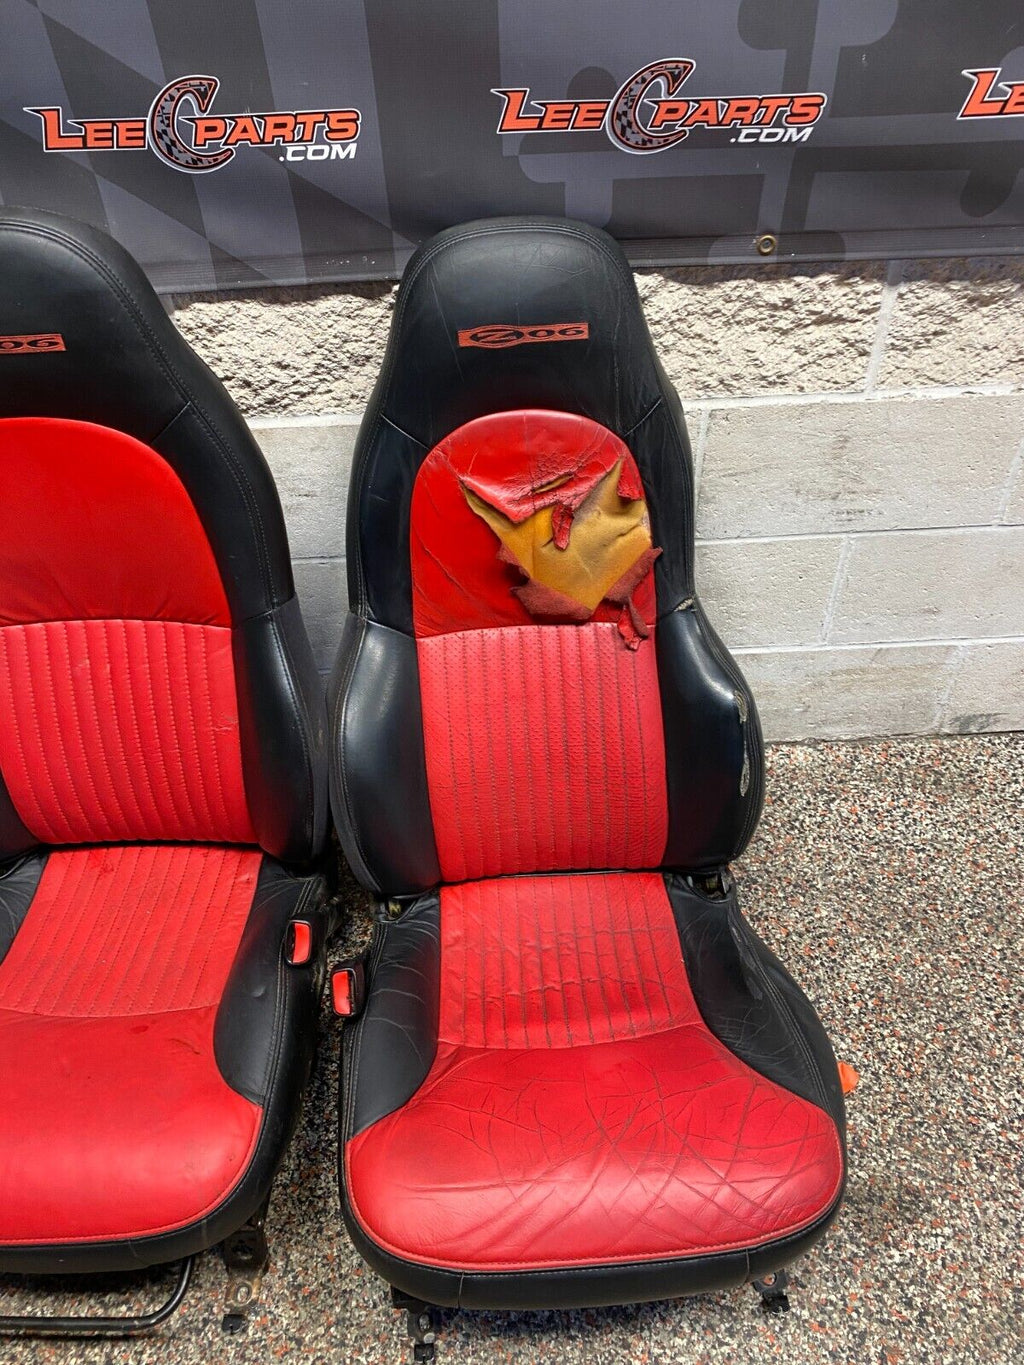 2001 CORVETTE C5 Z06 OEM MOD RED SEATS PAIR DR PS USED **NEED RECOVERED**